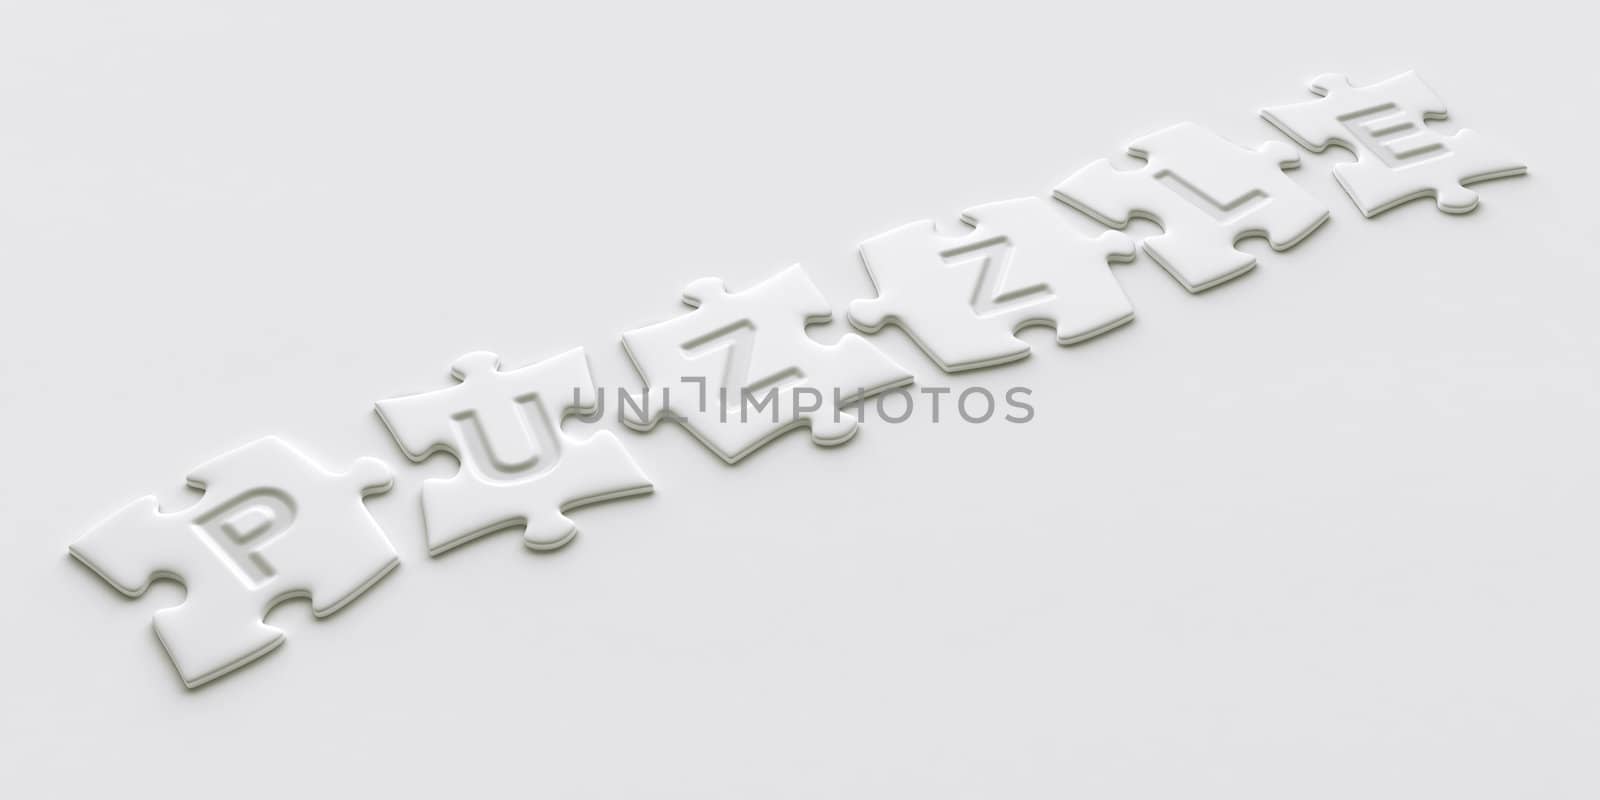 Puzzle pieces with text written on them by zentilia